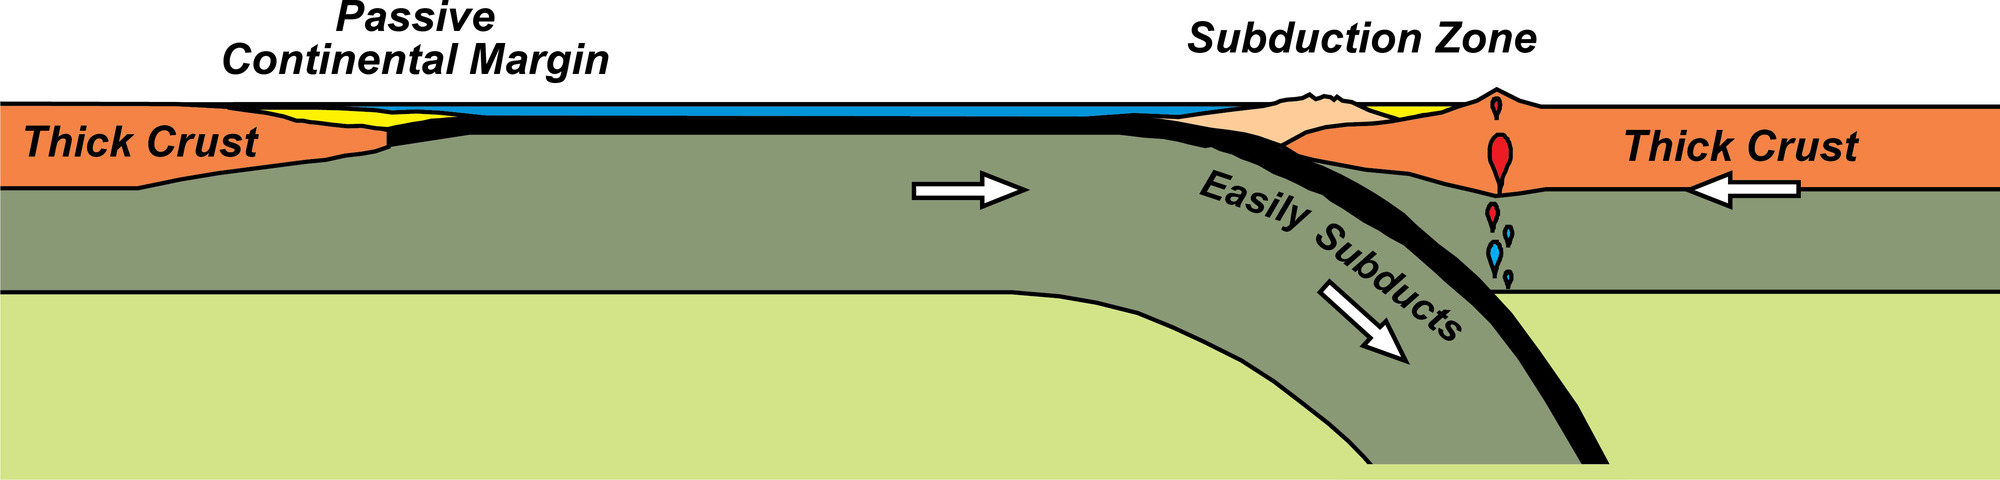 illustration of the upper layers of the earth showing subduction zone and narrowing ocean basin